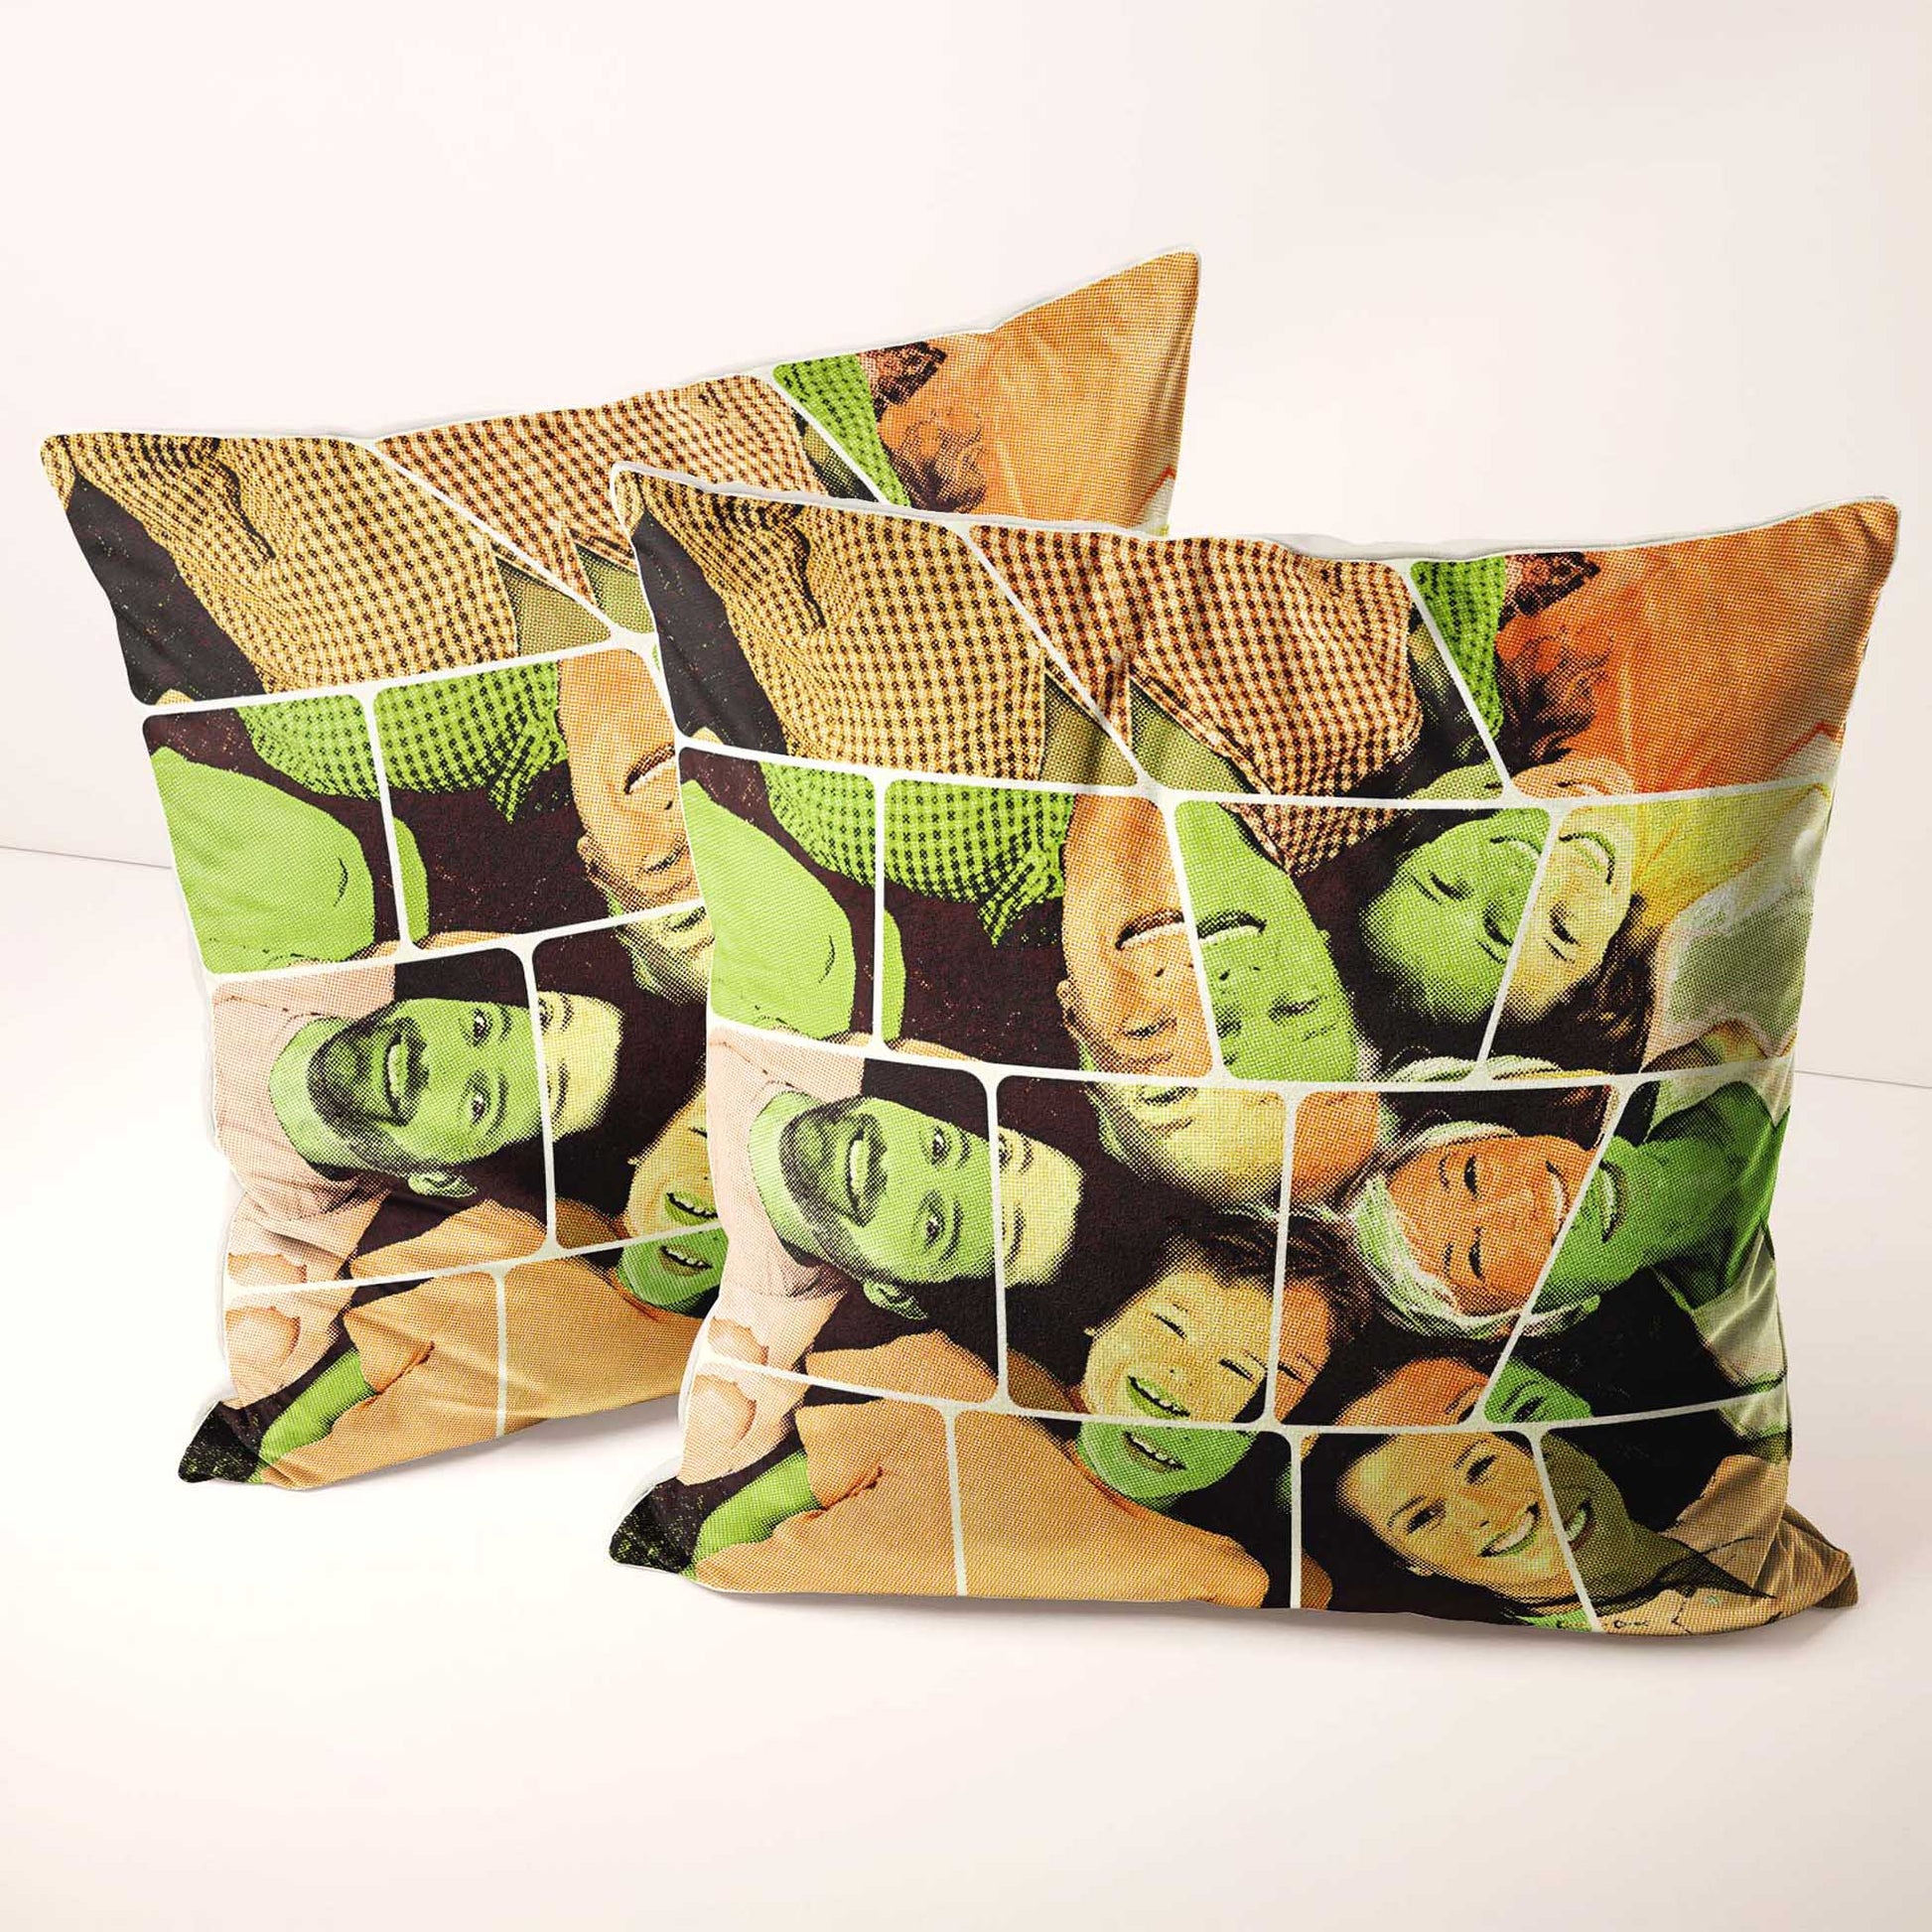 The Personalised Vintage Comics Cushion is a true masterpiece for your home decor. Its cartoon design, created from your photo, showcases a fresh and cool look with vibrant orange and green colors. Made from soft velvet, luxury cushion